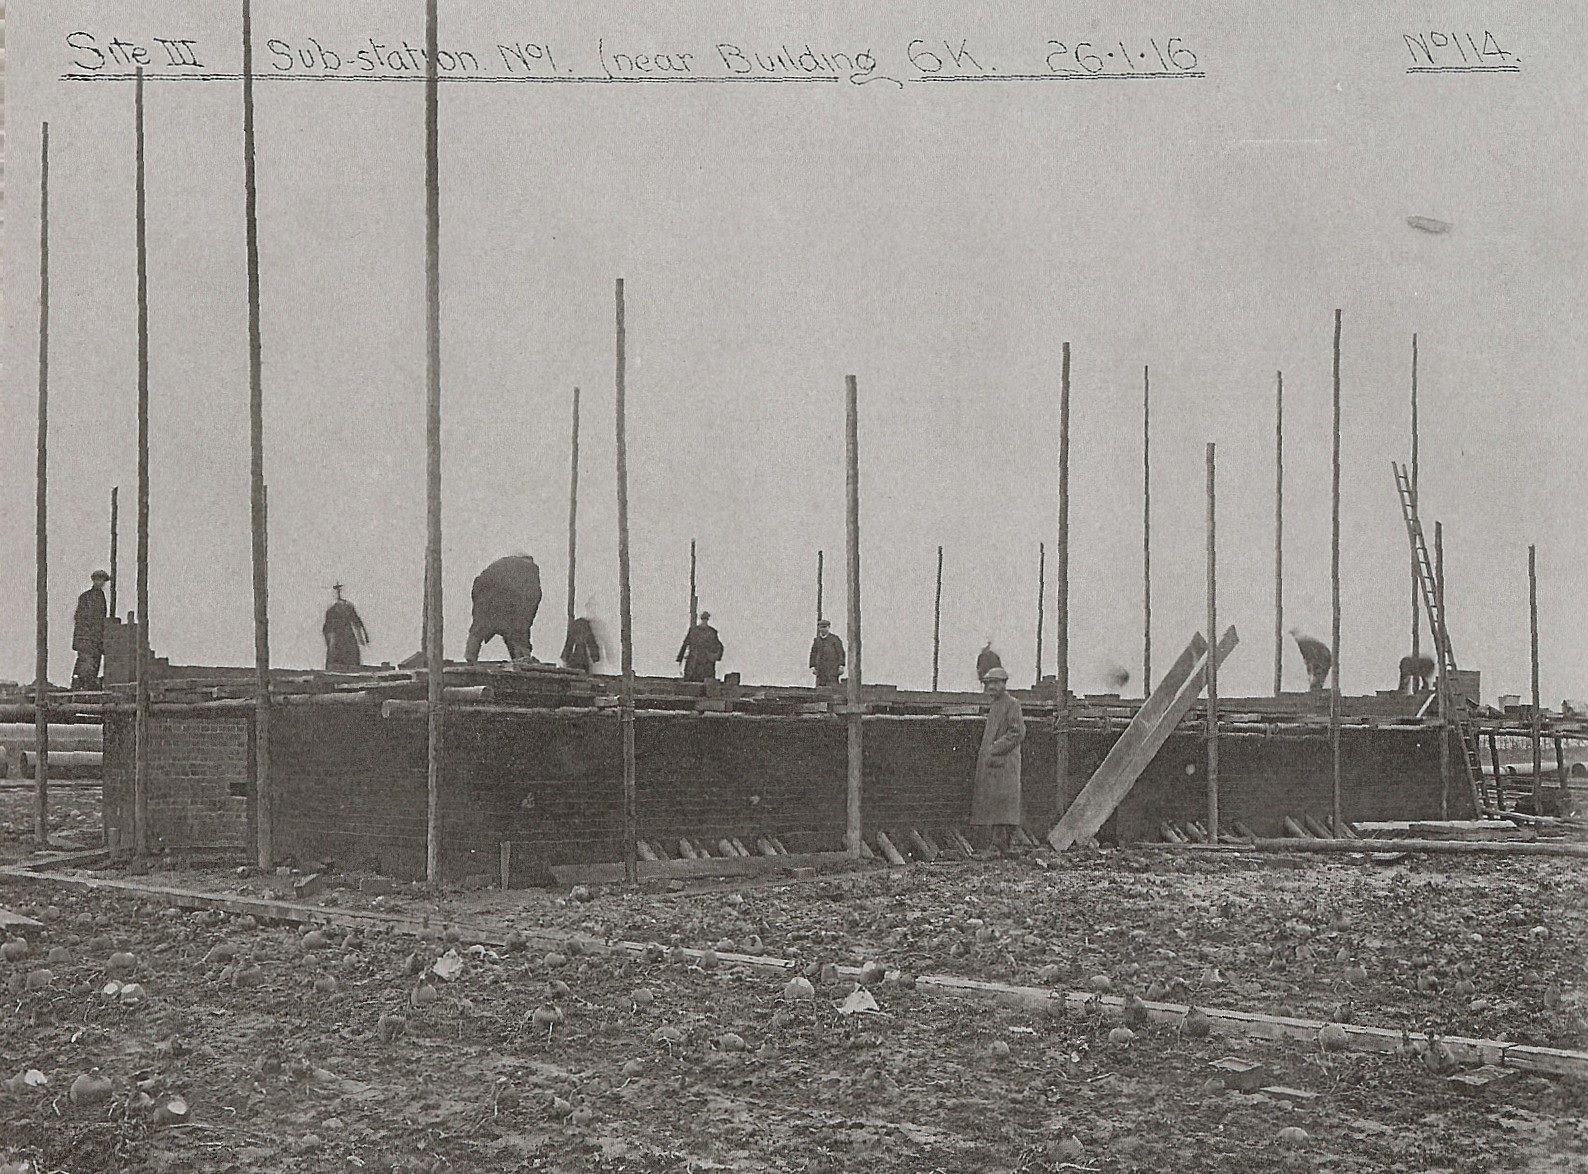 Construction of a sub-station at H M Factory Gretna in 1916. This is an archive photo.